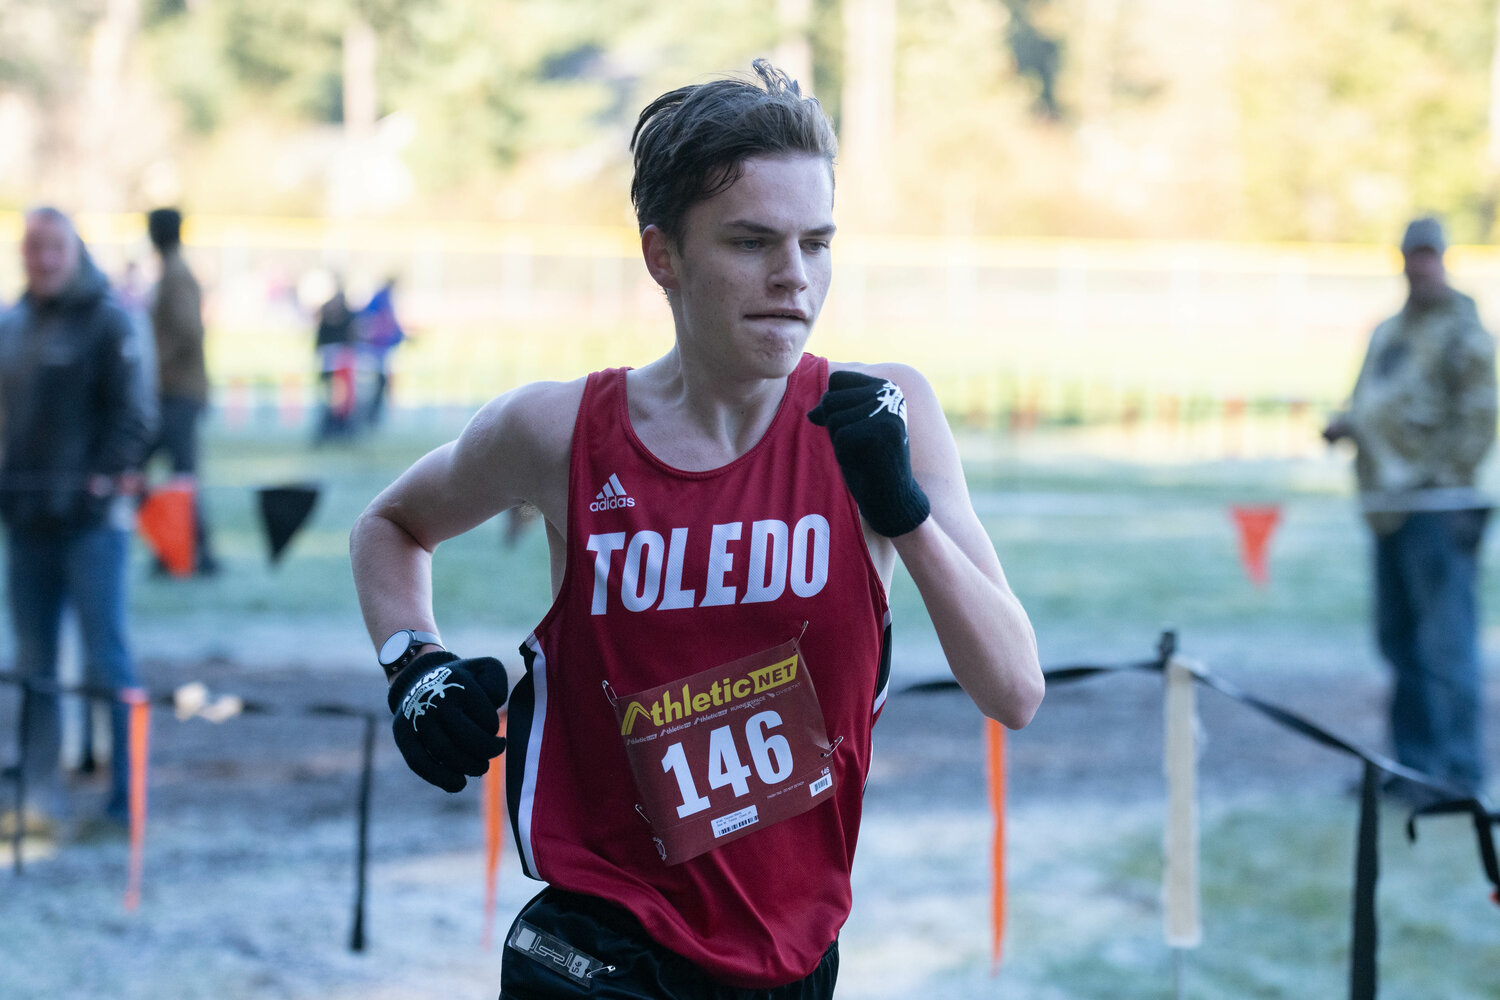 Toledo's Treyton Marty takes second place in the boys race at the 1B/2B District 4 cross country championships meet on Oct. 28 in Rainier.